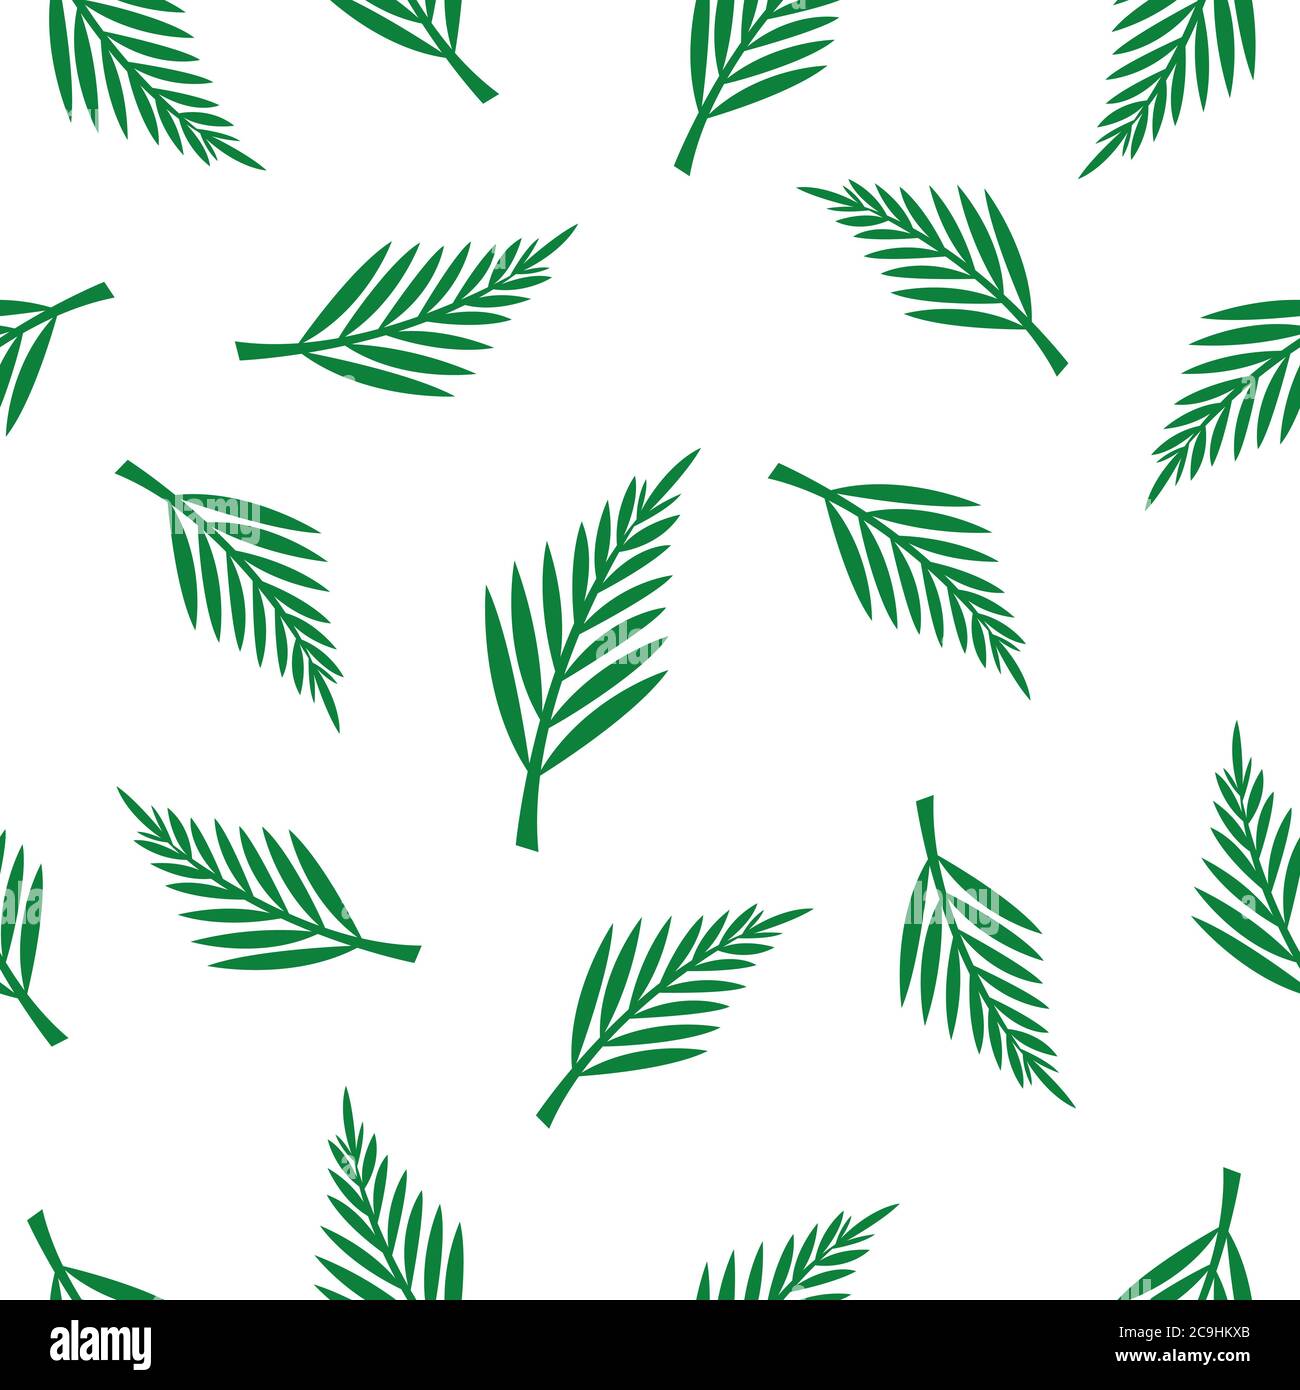 Palm leaves seamless pattern background. Seamless palm leafs background. Stock Vector